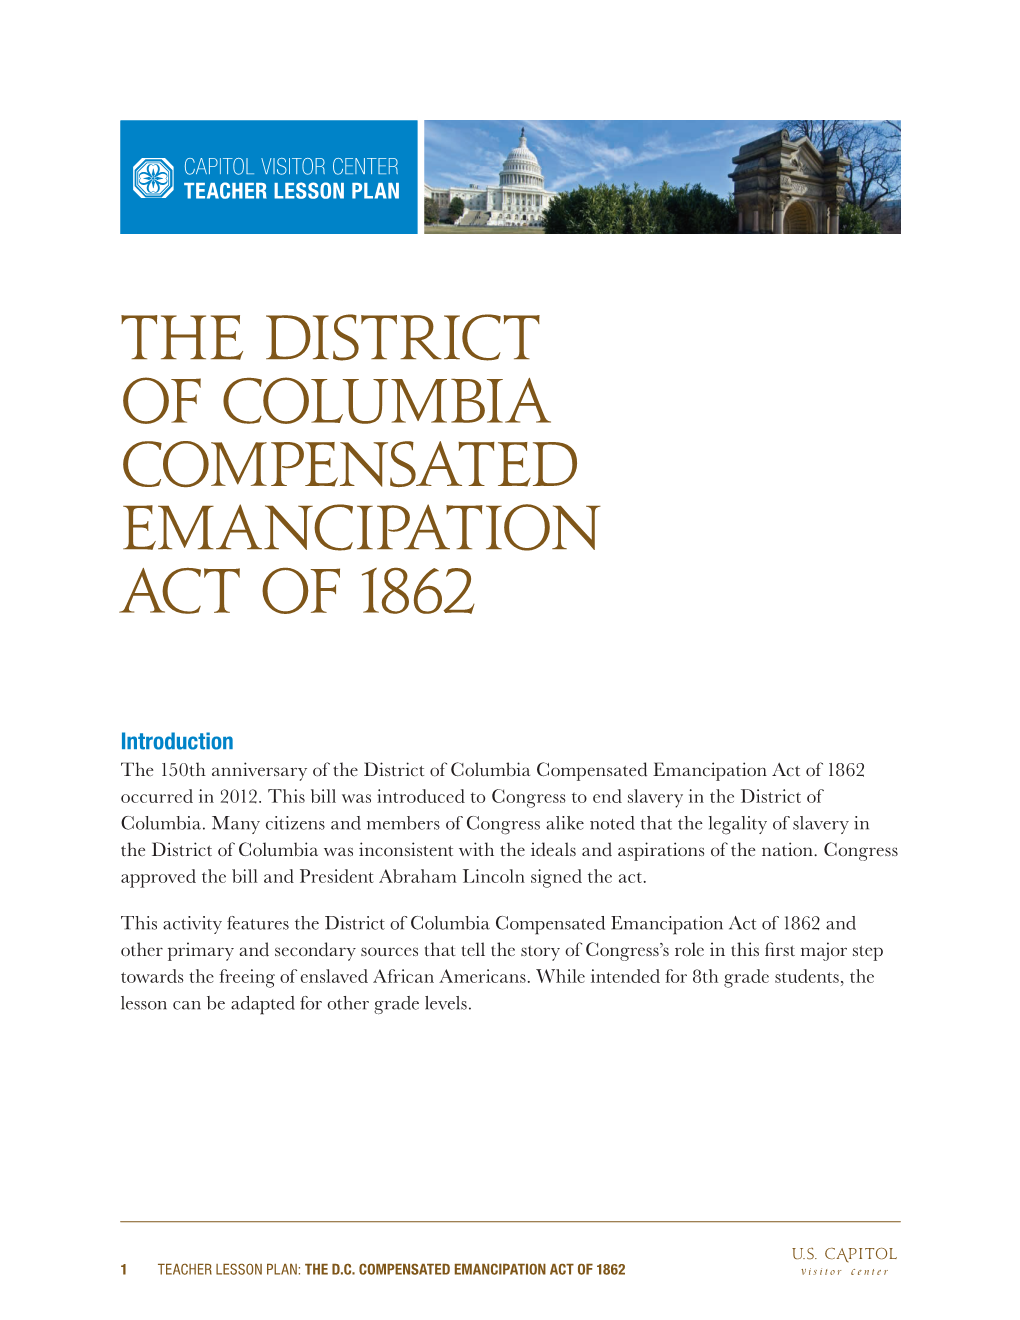 The District of Columbia Compensated Emancipation Act of 1862